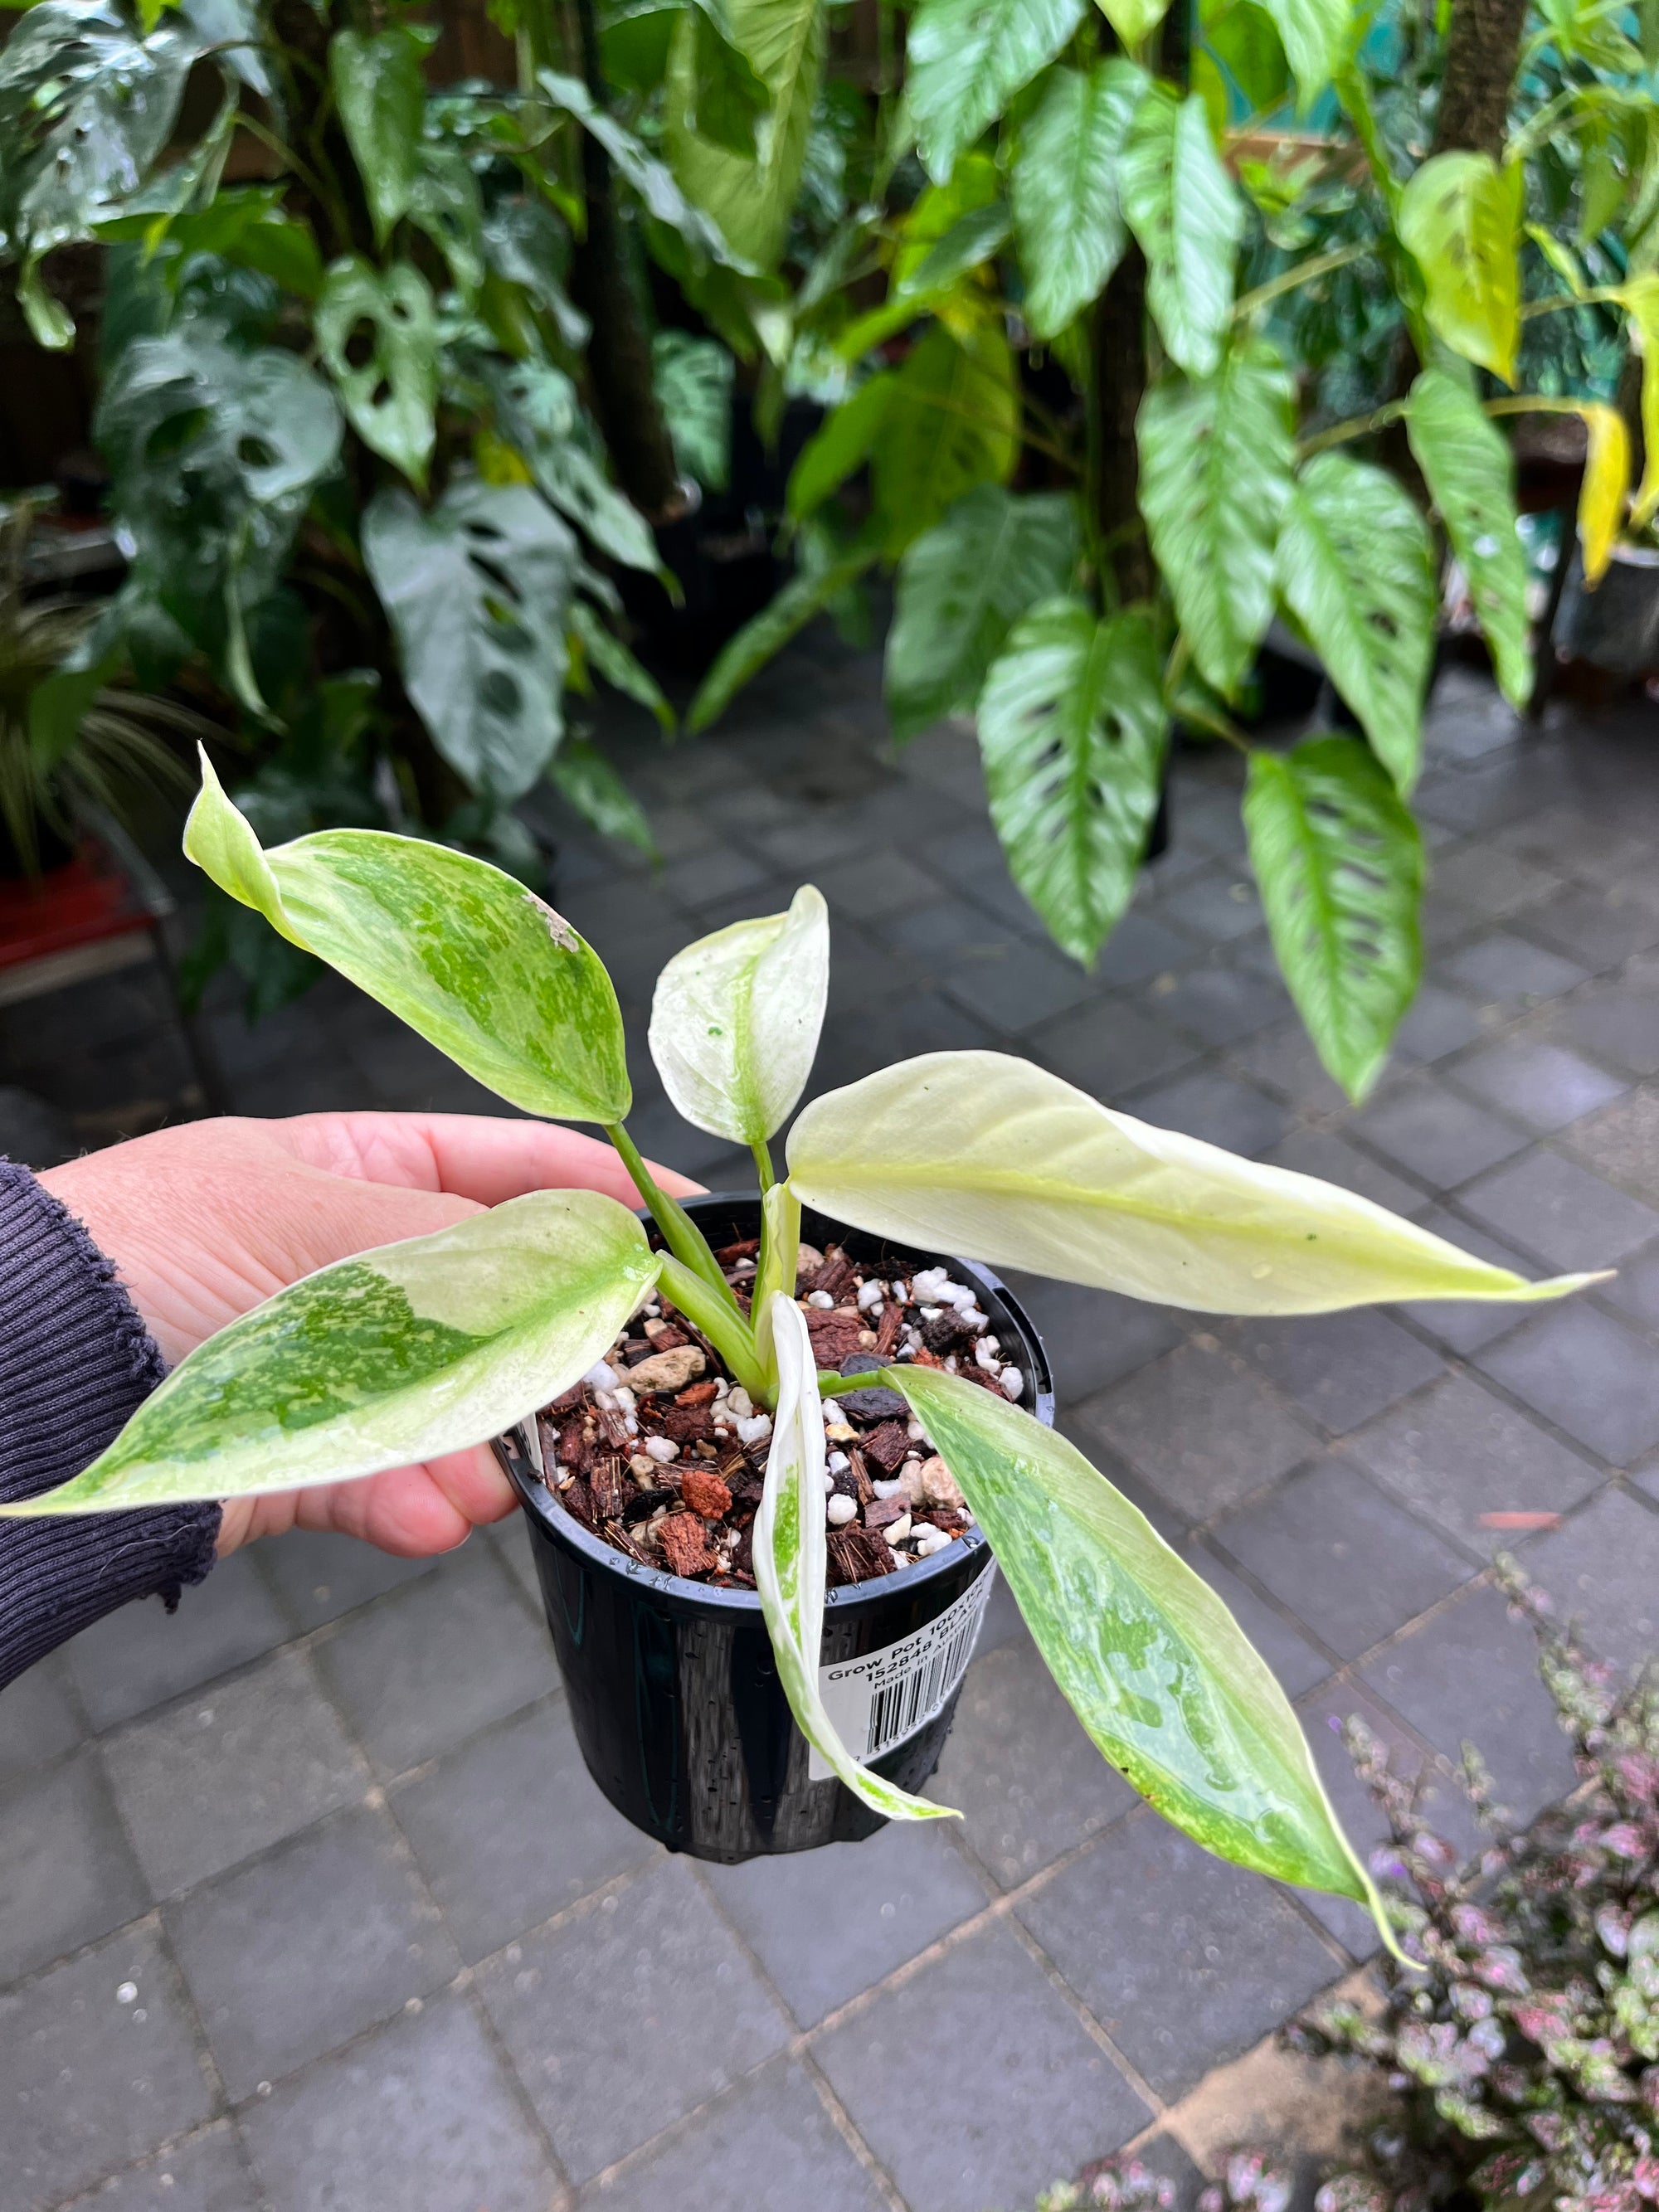 Philodendron Jose Buono seedlings - High variegation